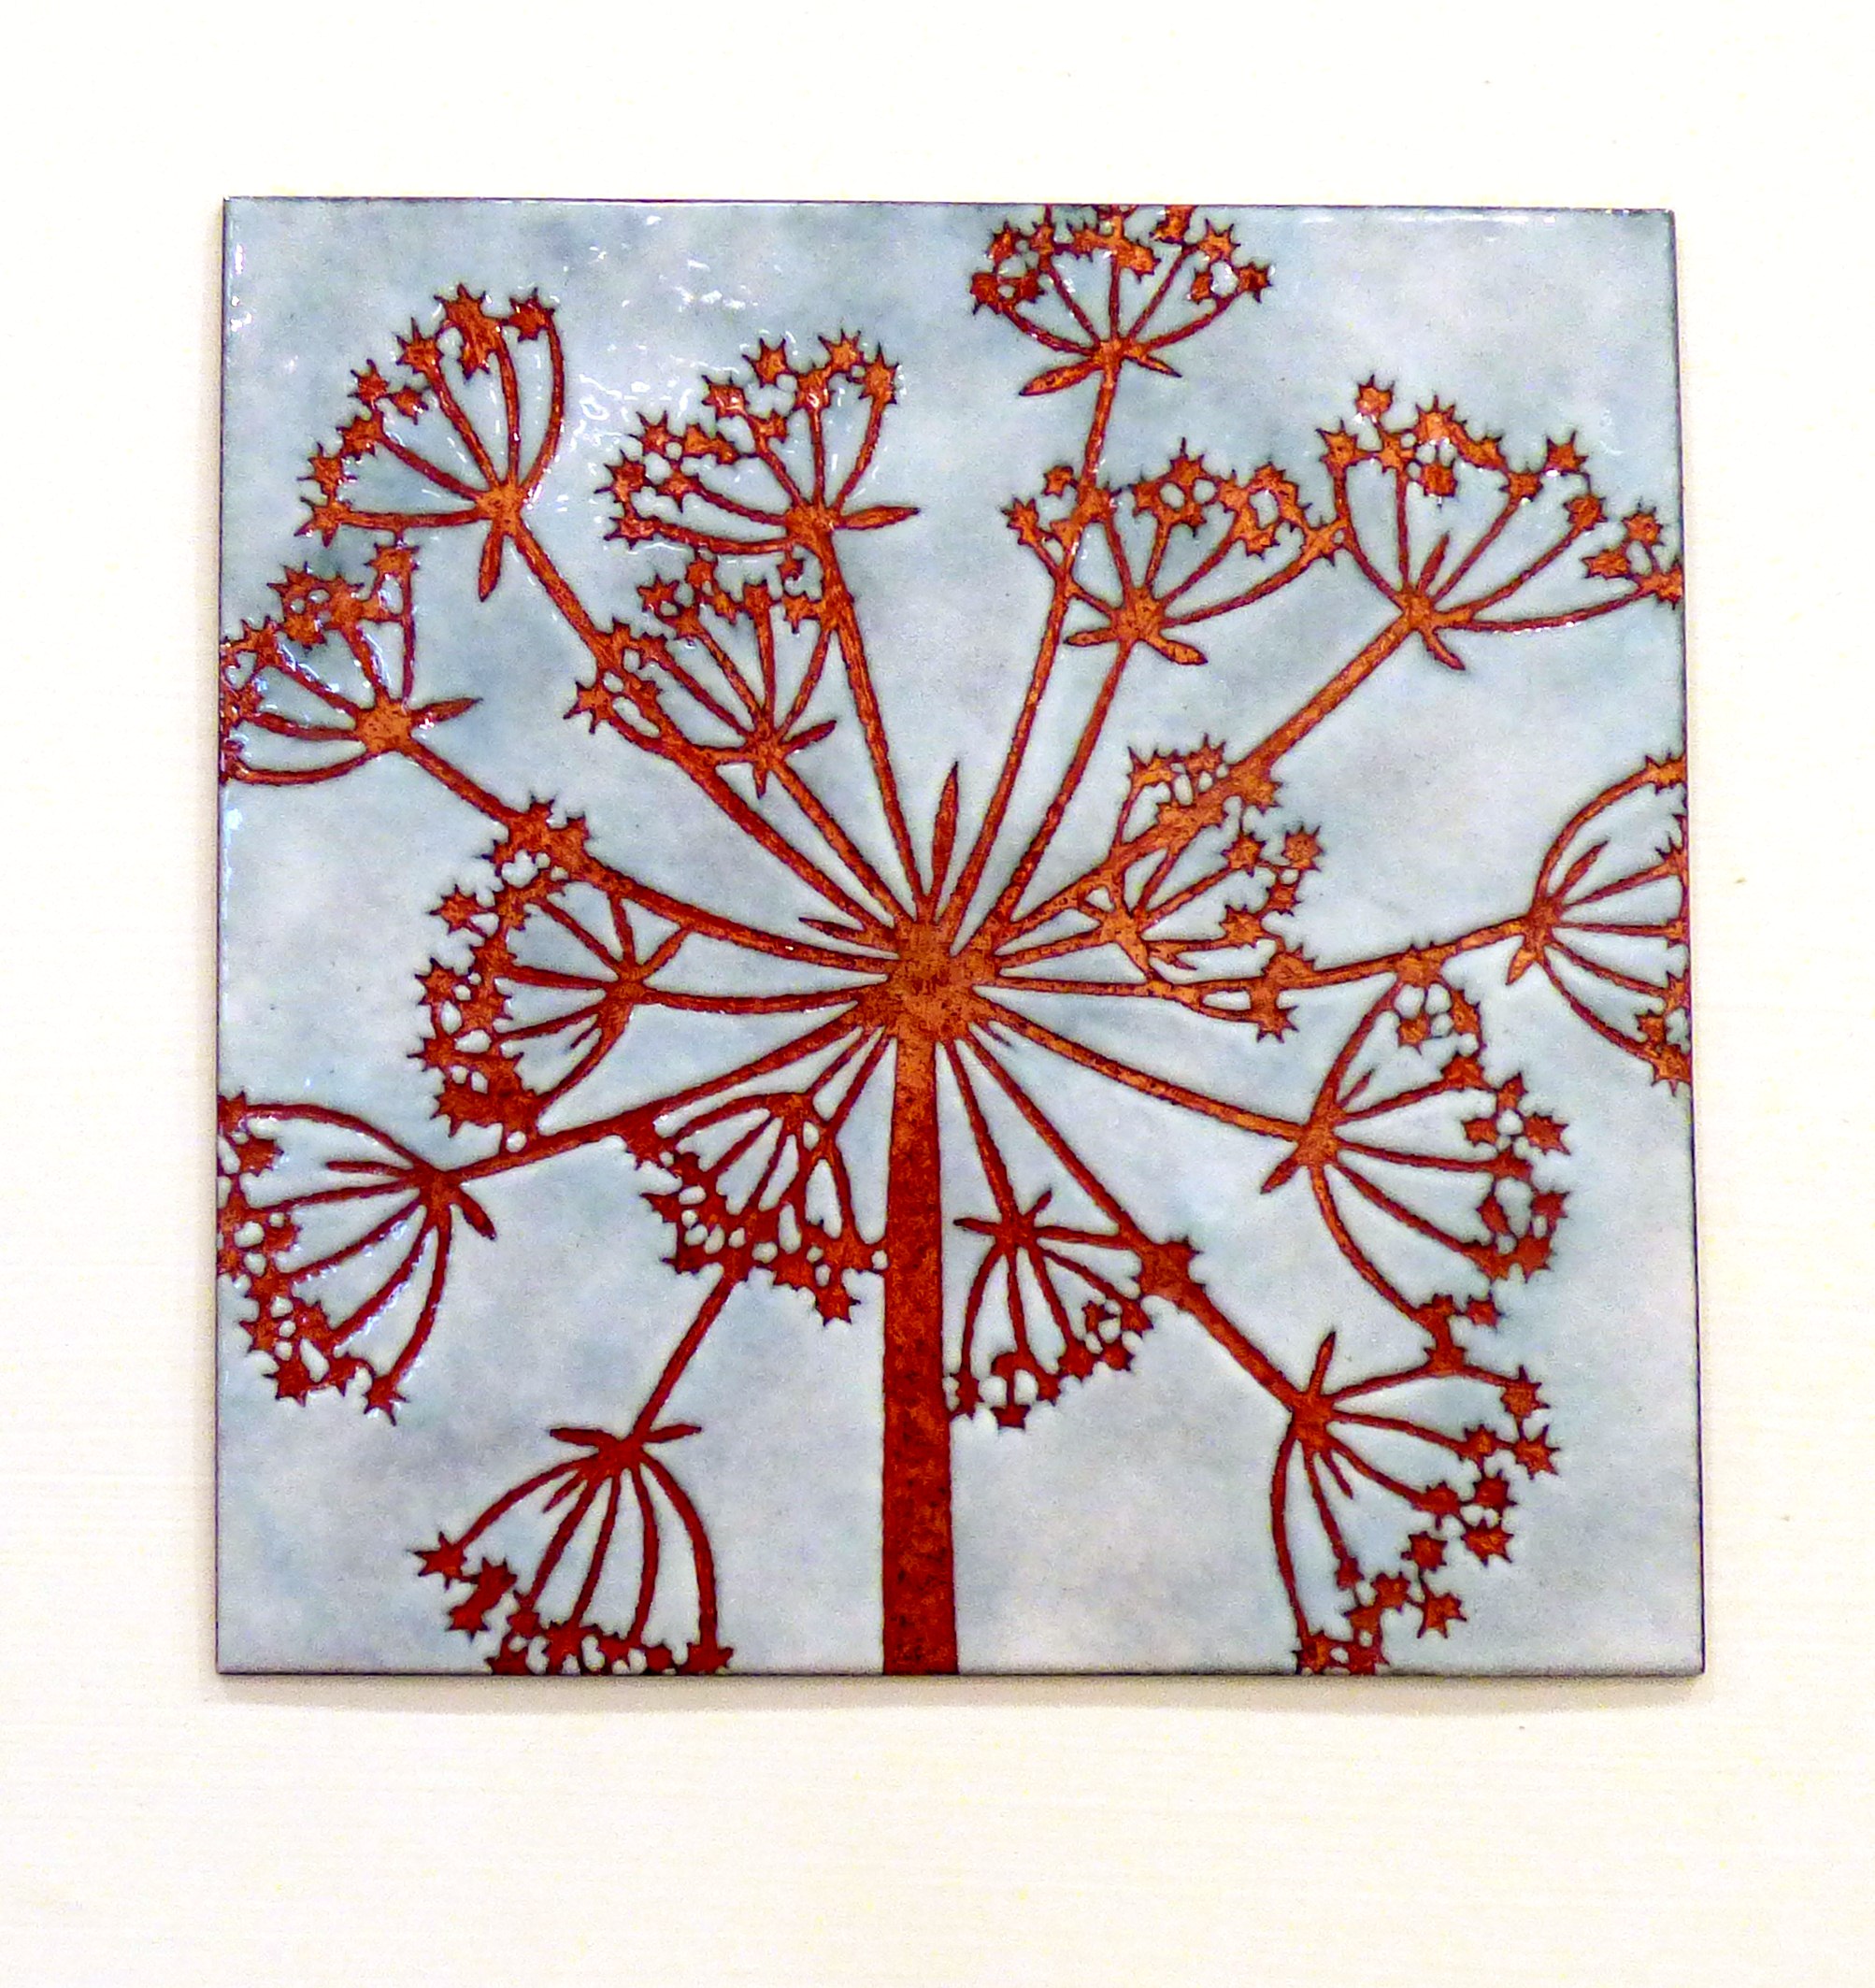 ENAMELLED PANEL 3 by Janine Partington, CRAFTED exhibitioin, Kirkby Gallery, 2016